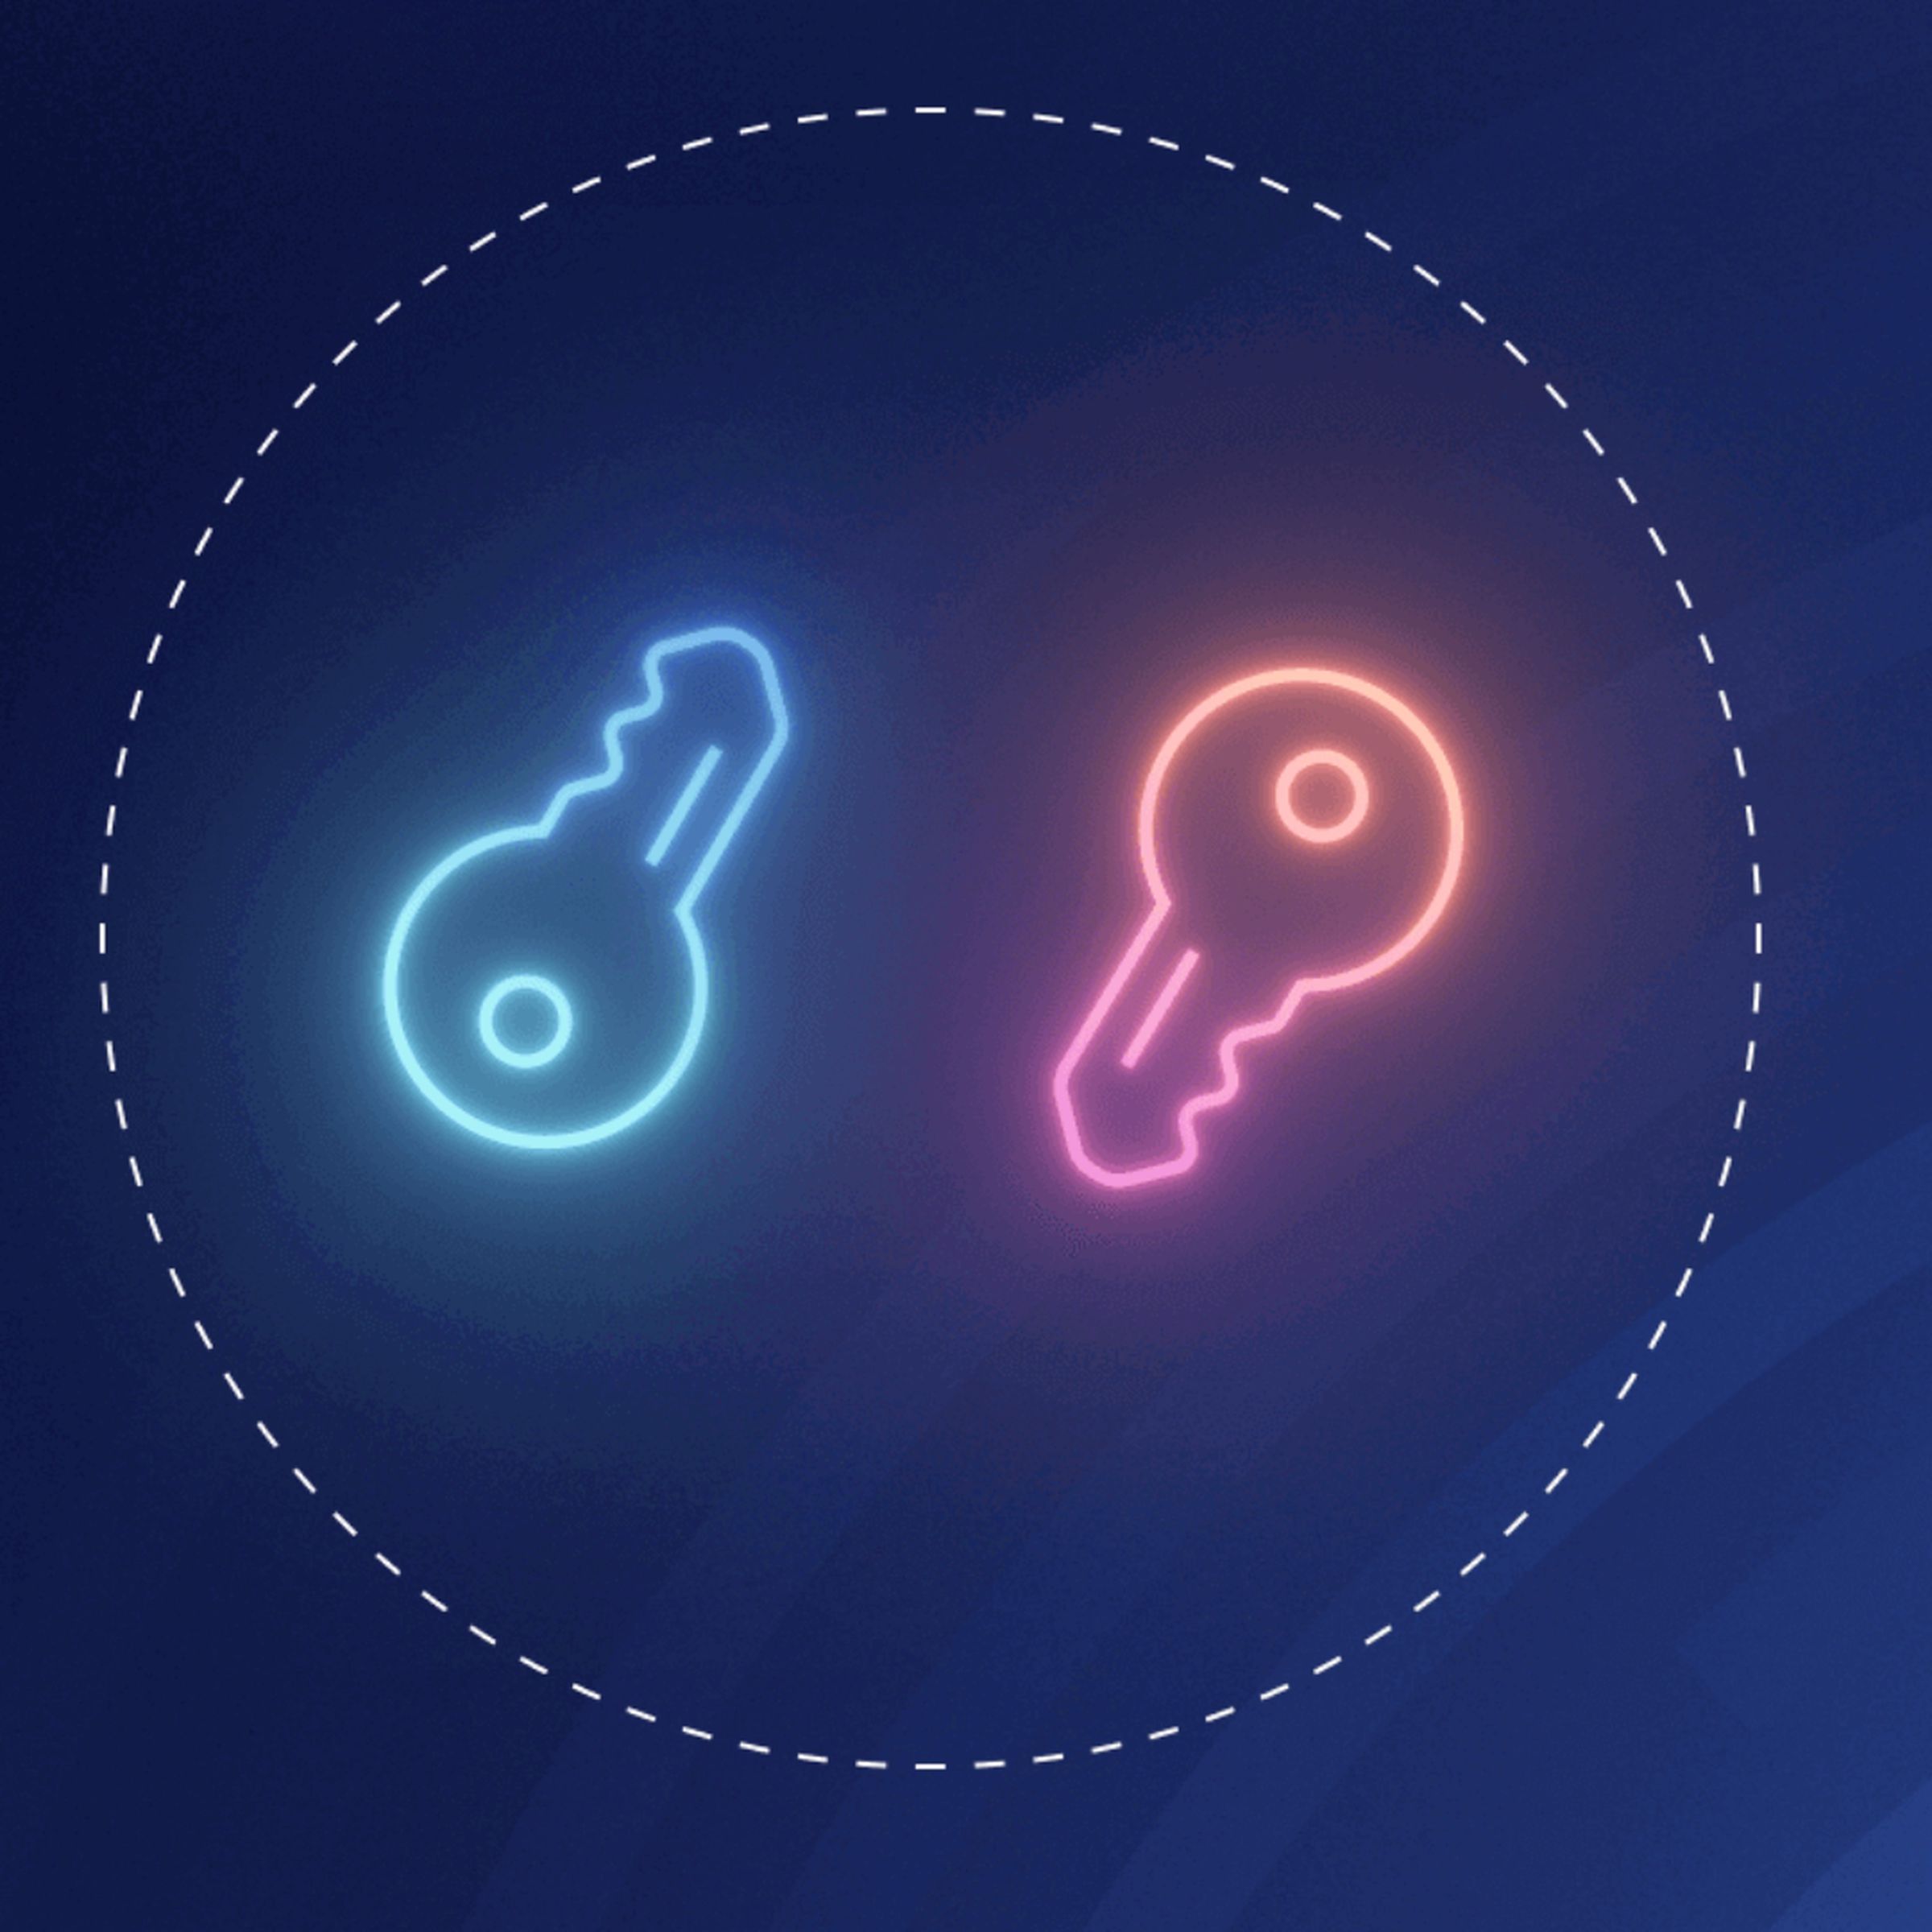 A red neon key and a blue neon key in a circle, against a dark blue background.